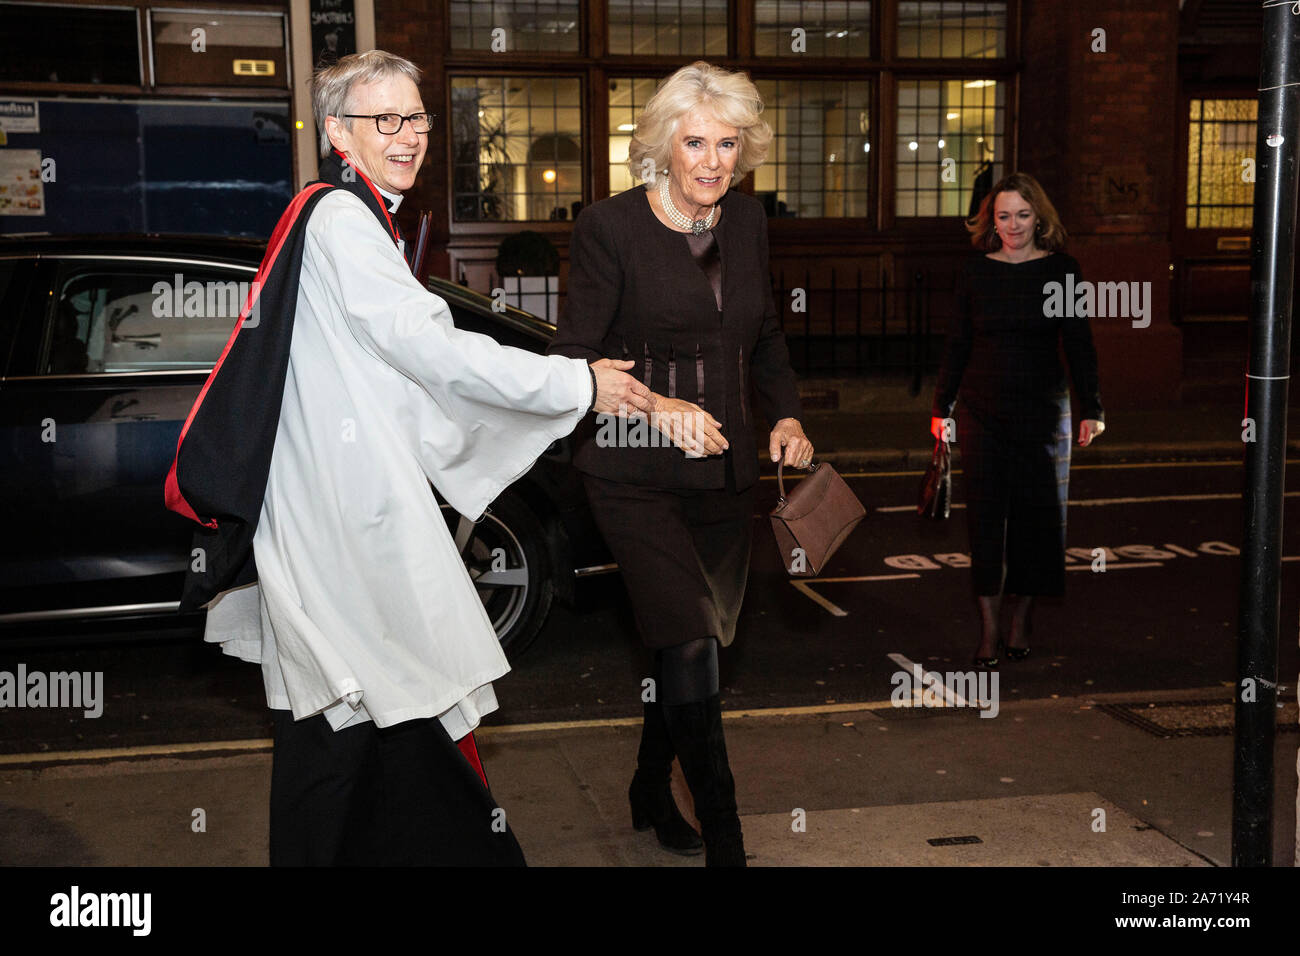 London, UK. 29th Oct, 2019. St Bride's Church, Fleet Street - Picture shows Camilla, Duchess of Cornwall greeted on arrival by The Reverend Canon Dr Alison Joyce at the Service of Remembrance Celebration to commemorate and support the journalists, photographers, camera-crew and support staff whose mission it is to bring us the news. Credit: Jeff Gilbert/Alamy Live News Stock Photo